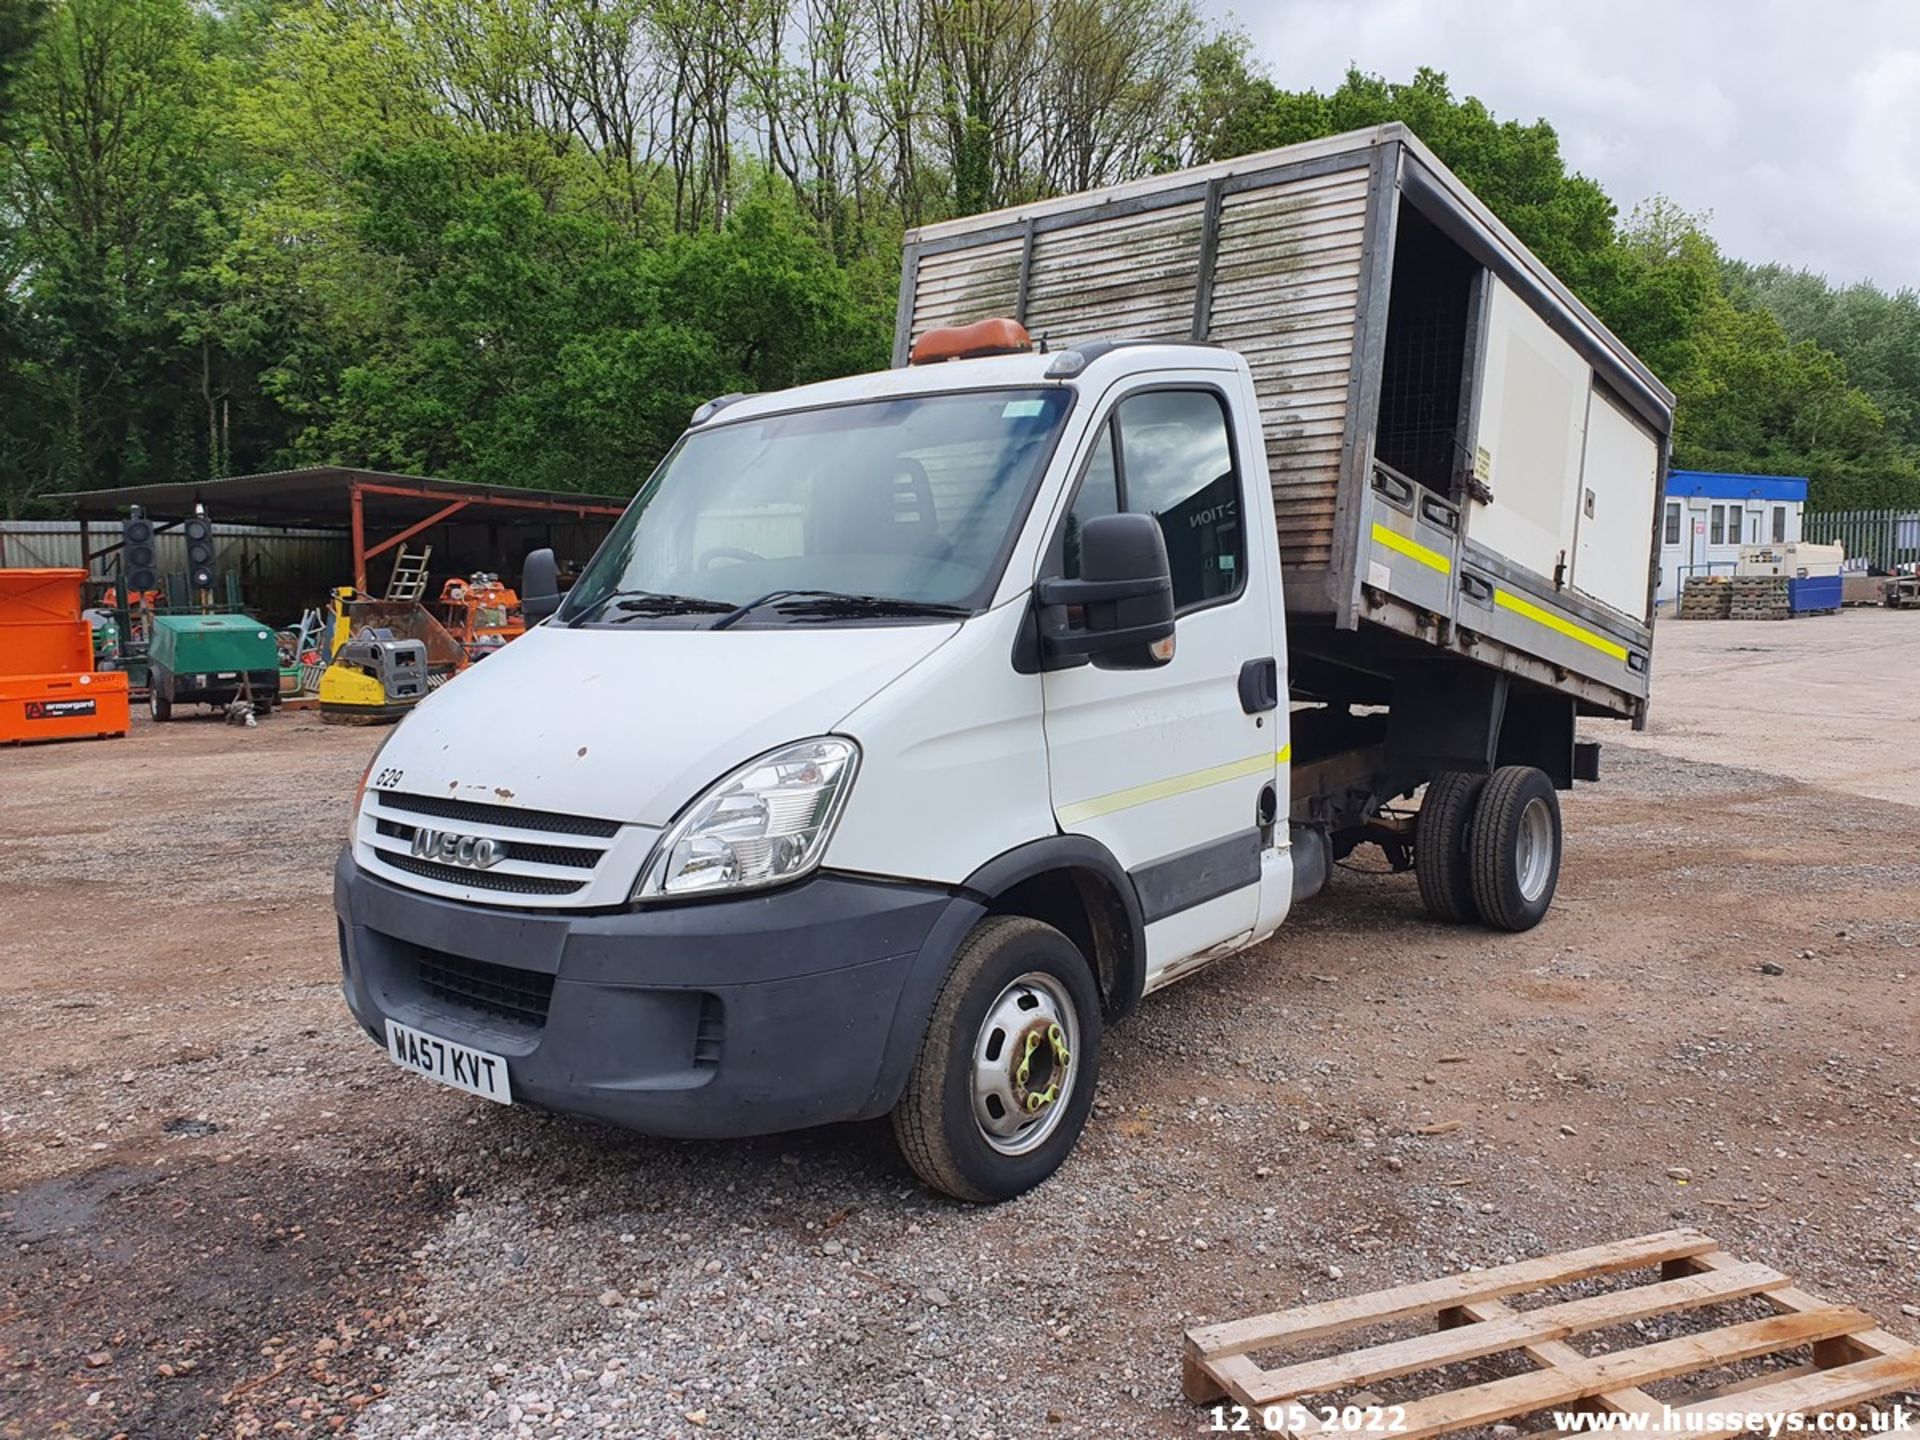 07/57 IVECO DAILY 35C15 MWB - 2998cc 2dr Tipper (White, 212k) - Image 11 of 21